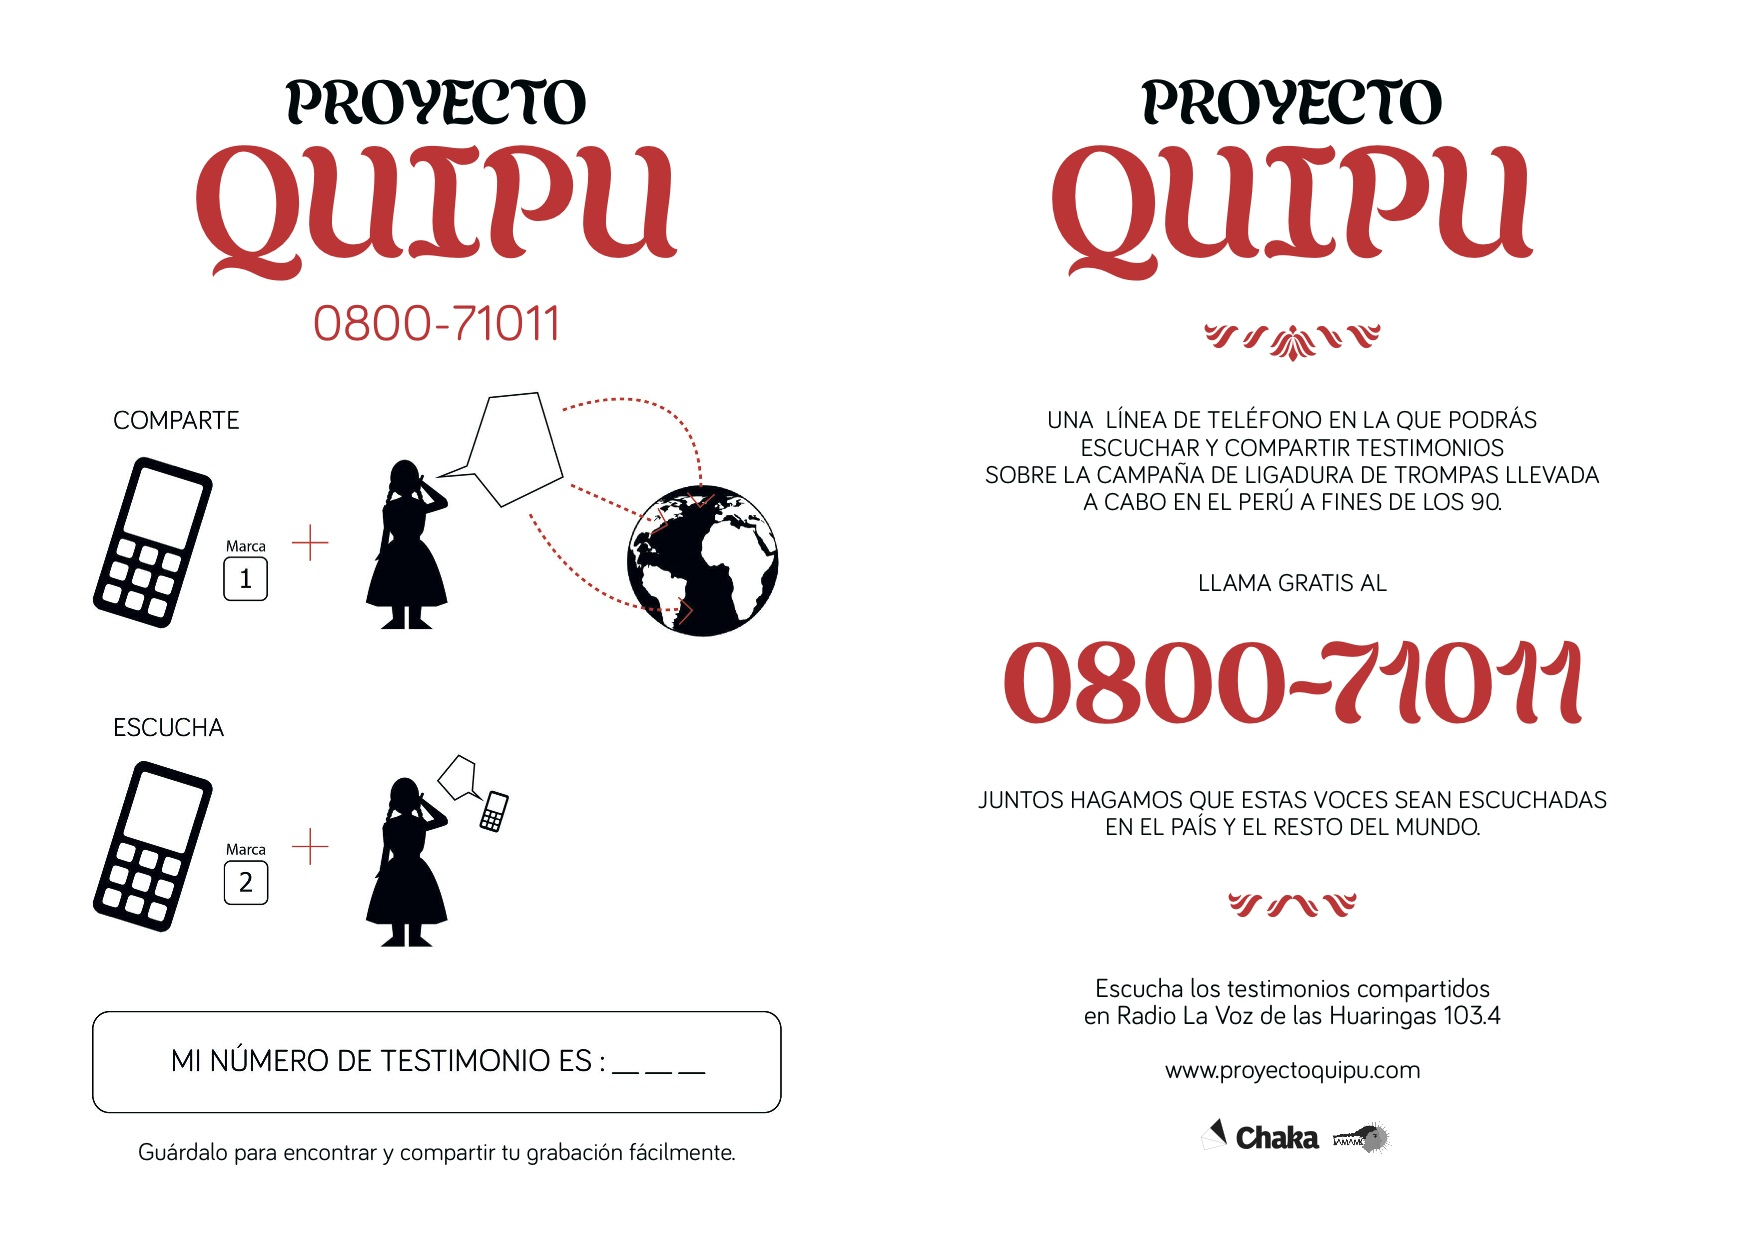 A brochure from the Quipu project advertising the program. Republished with permission.